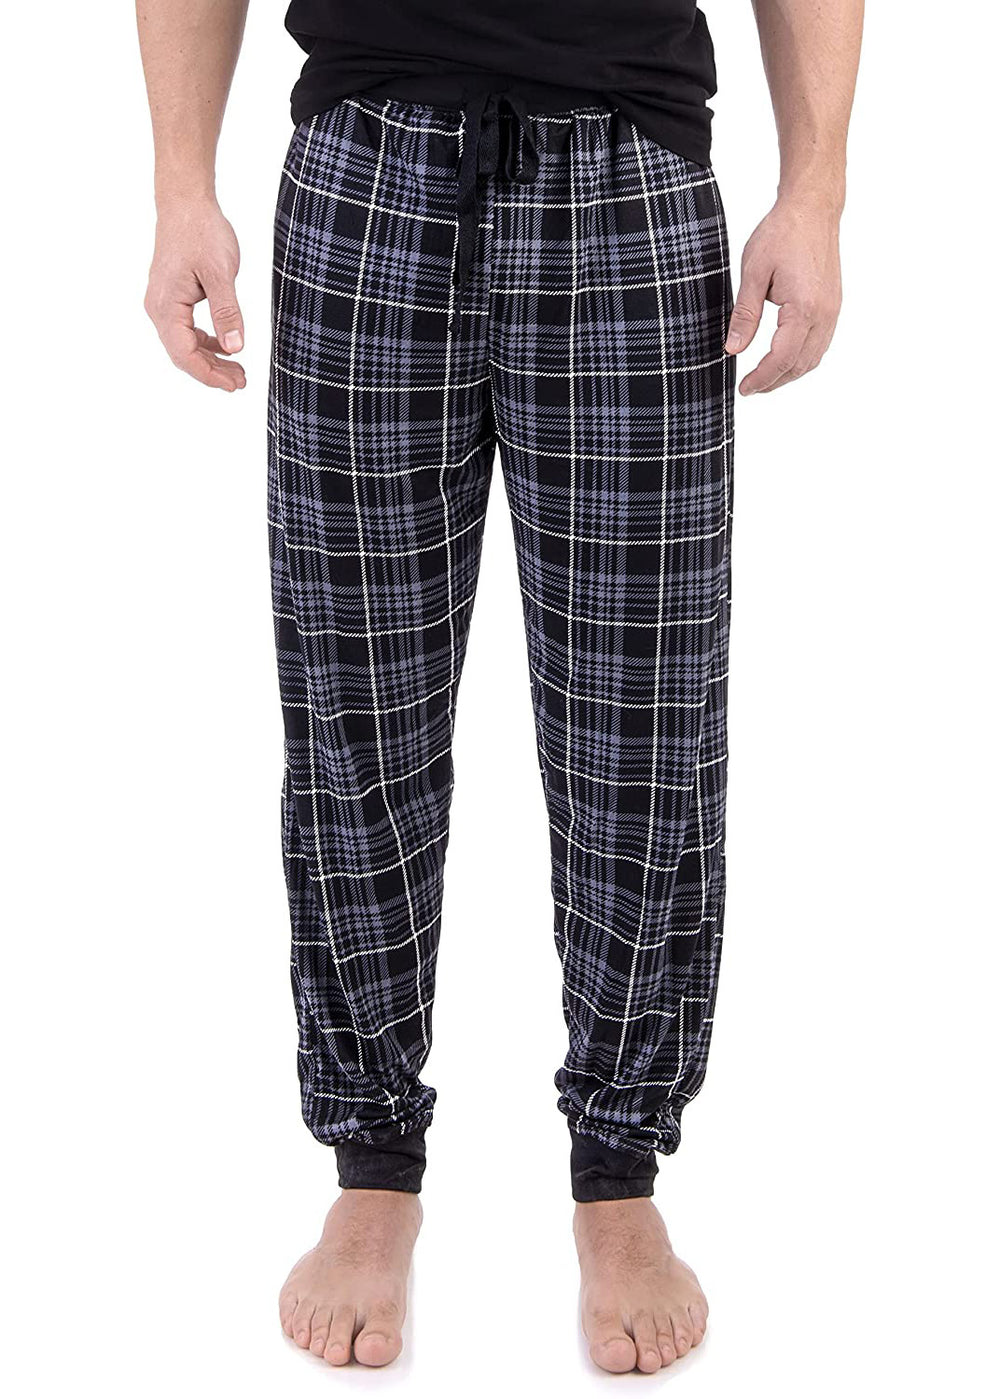 PJ joggers with soft velvety texture, stretch, elastic waistband, drawstring, and stylish ankle cuff. This pattern is a grey, black and white plaid. The waist and the cuffs are black